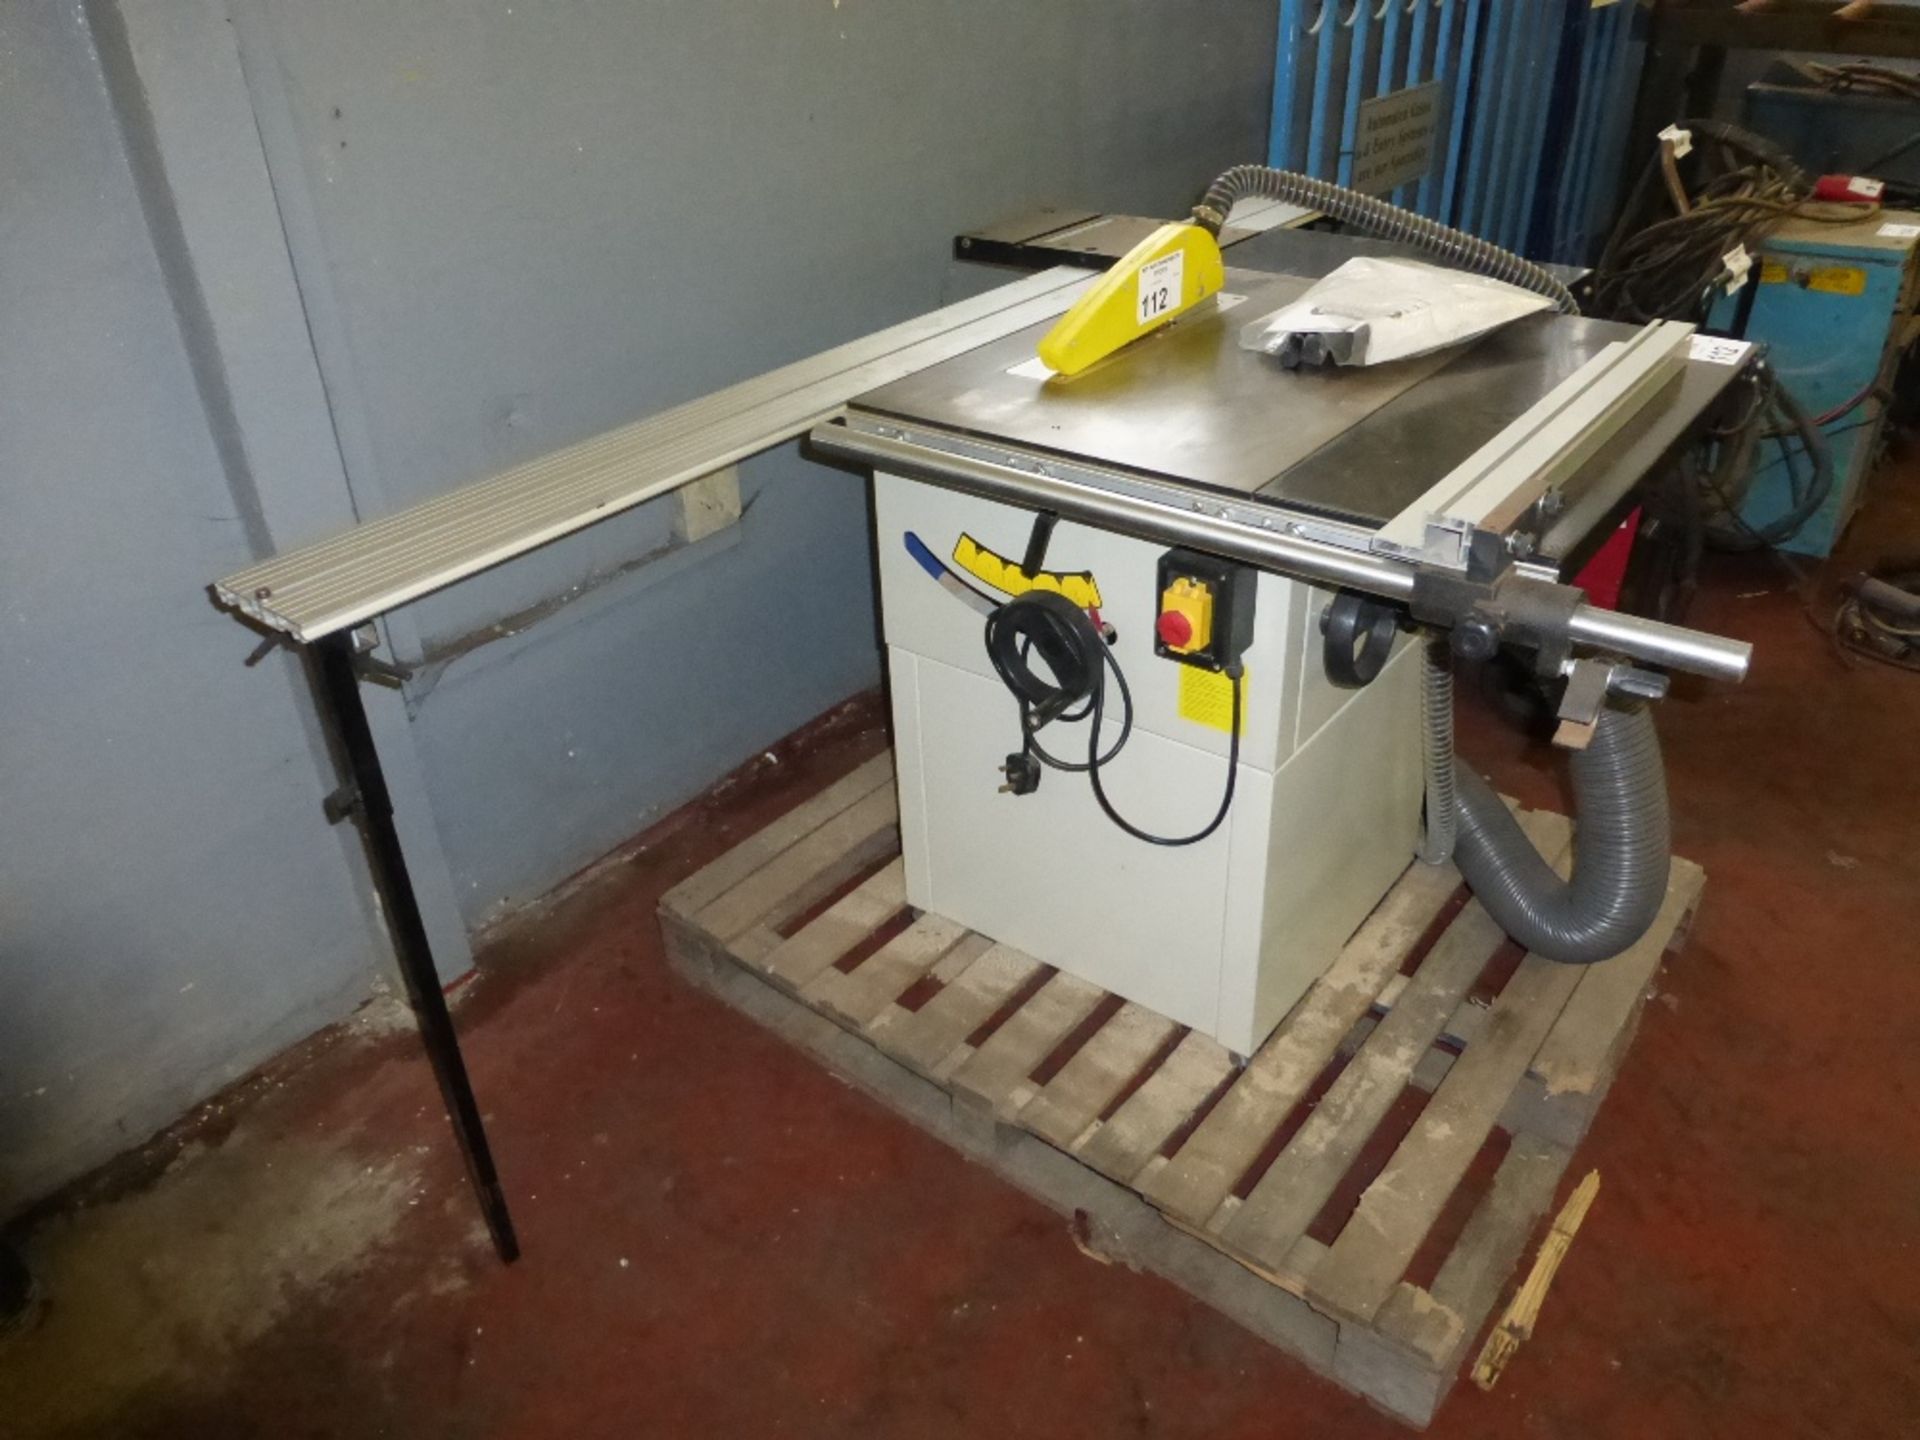 1 wood cutting table saw by Charnwood type W650 10 inch, 1ph & 1 Charnwood dust extractor type